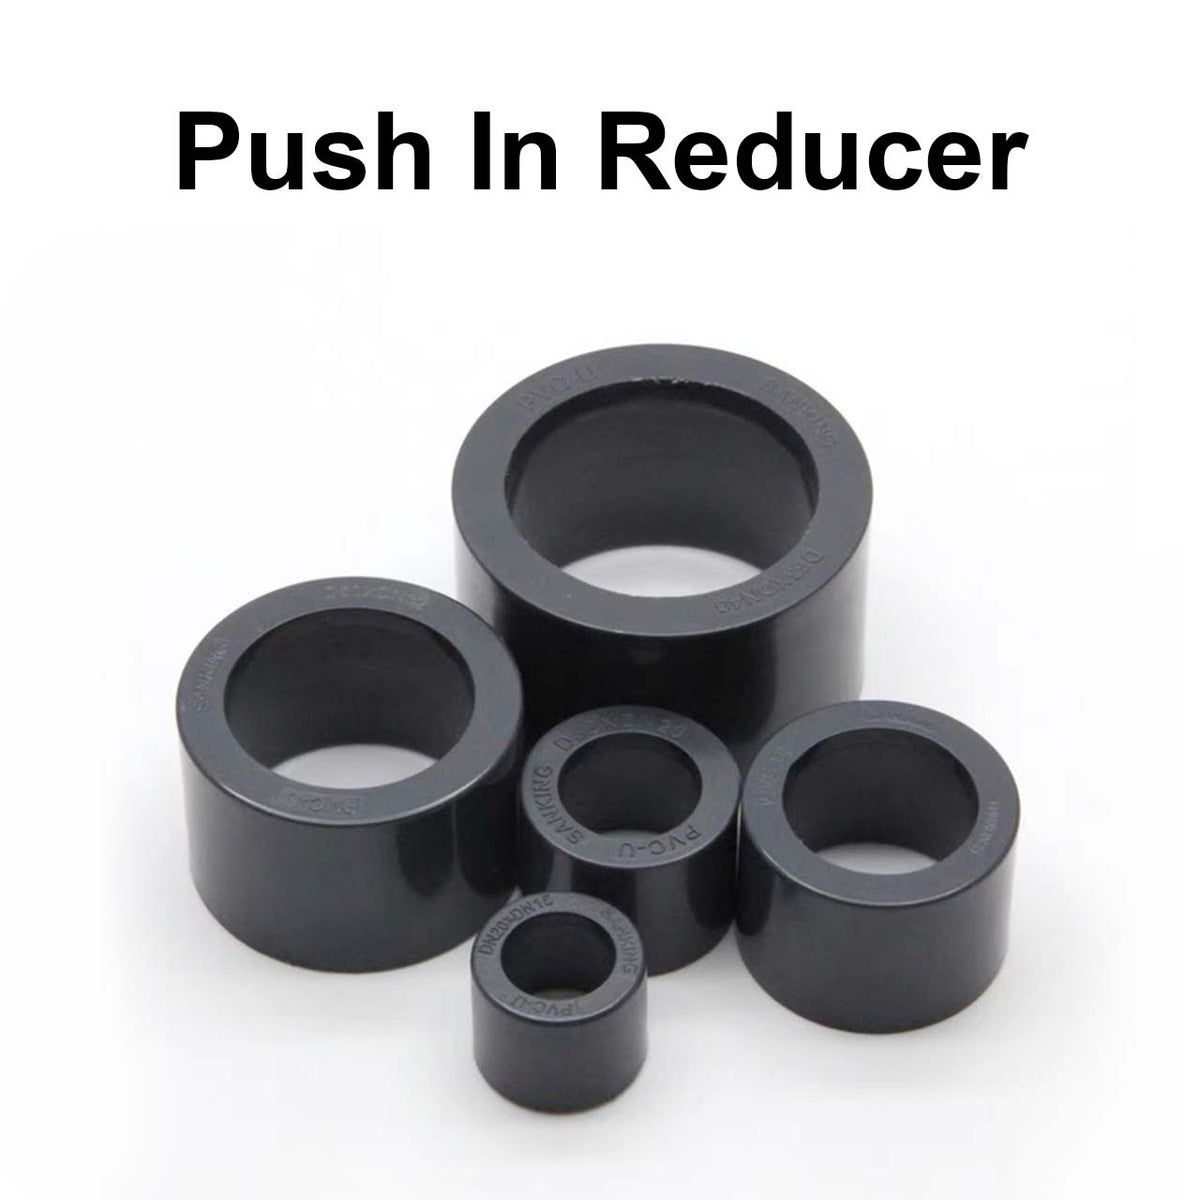 DIN Push In Reducer